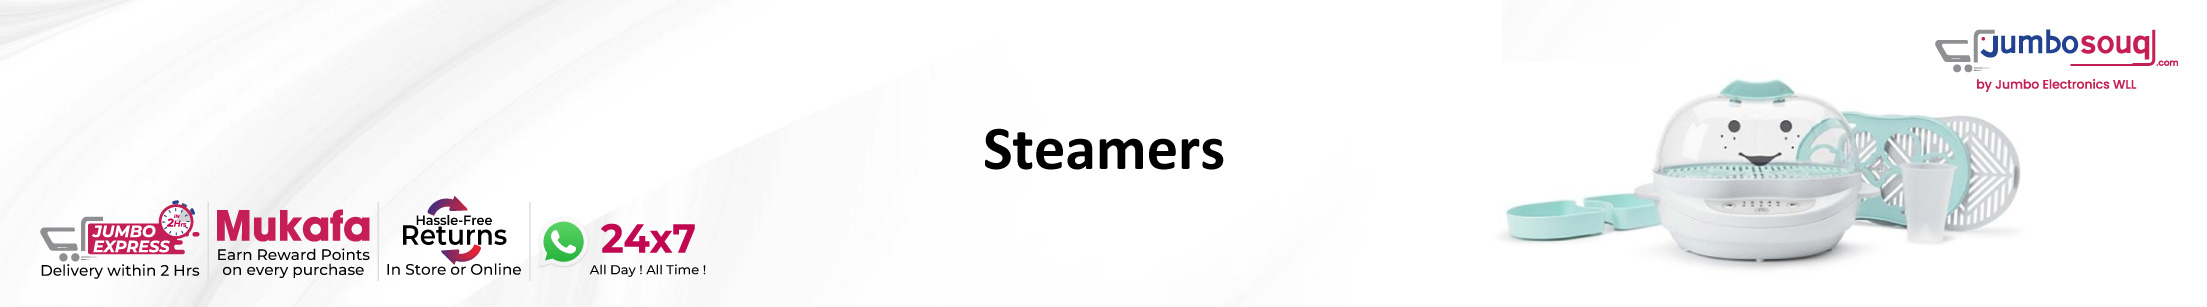 Steamers